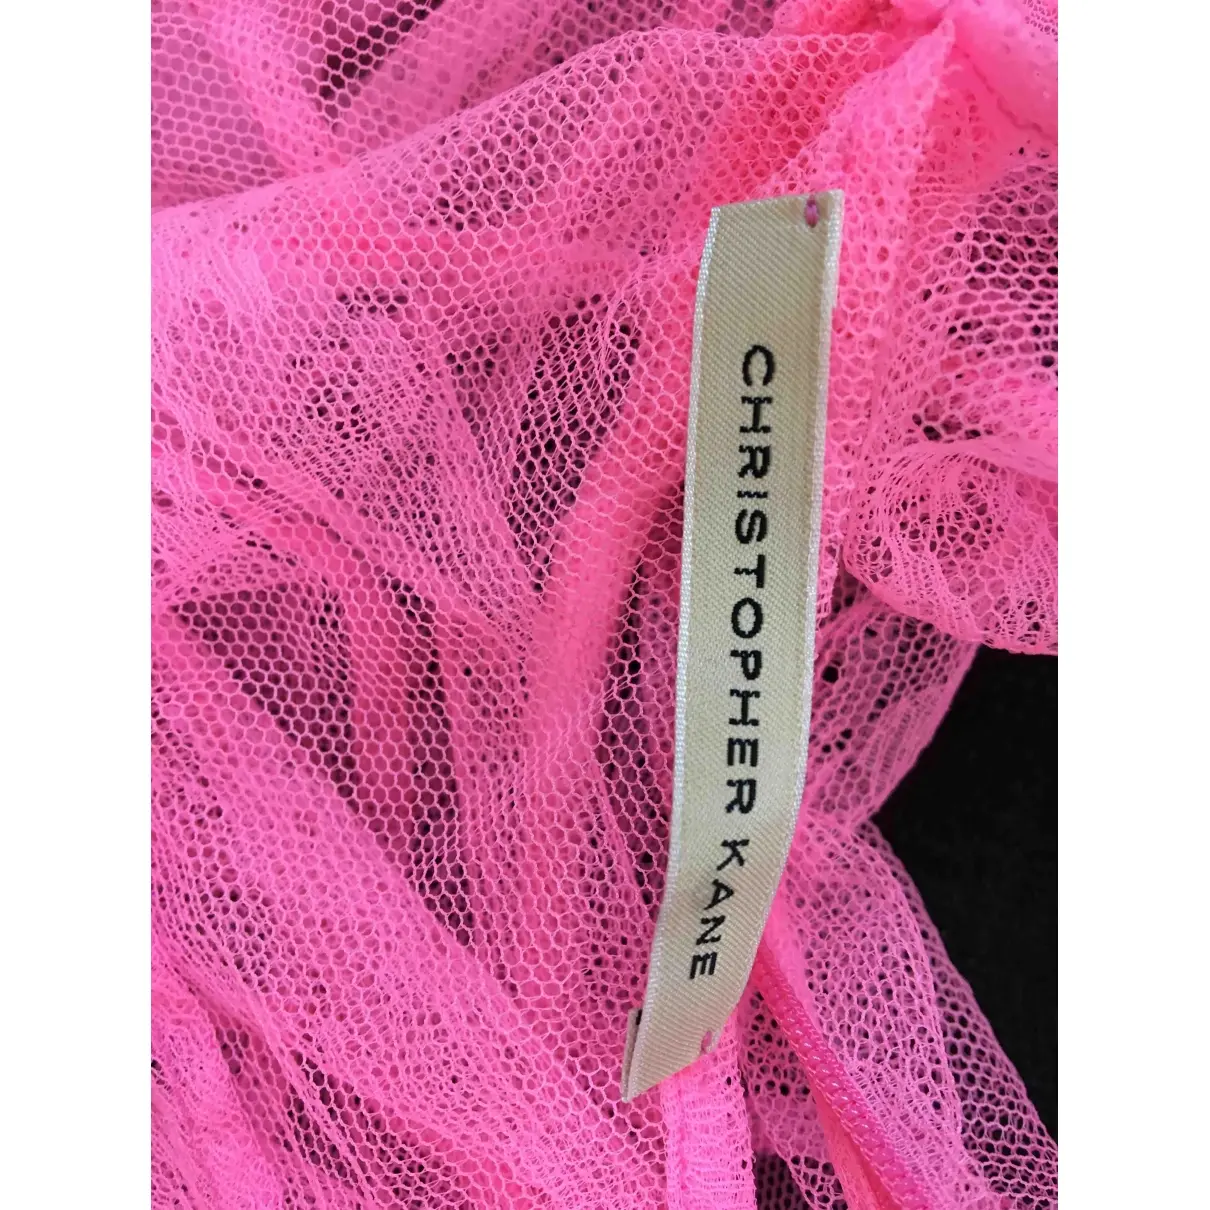 Buy Christopher Kane Camisole online